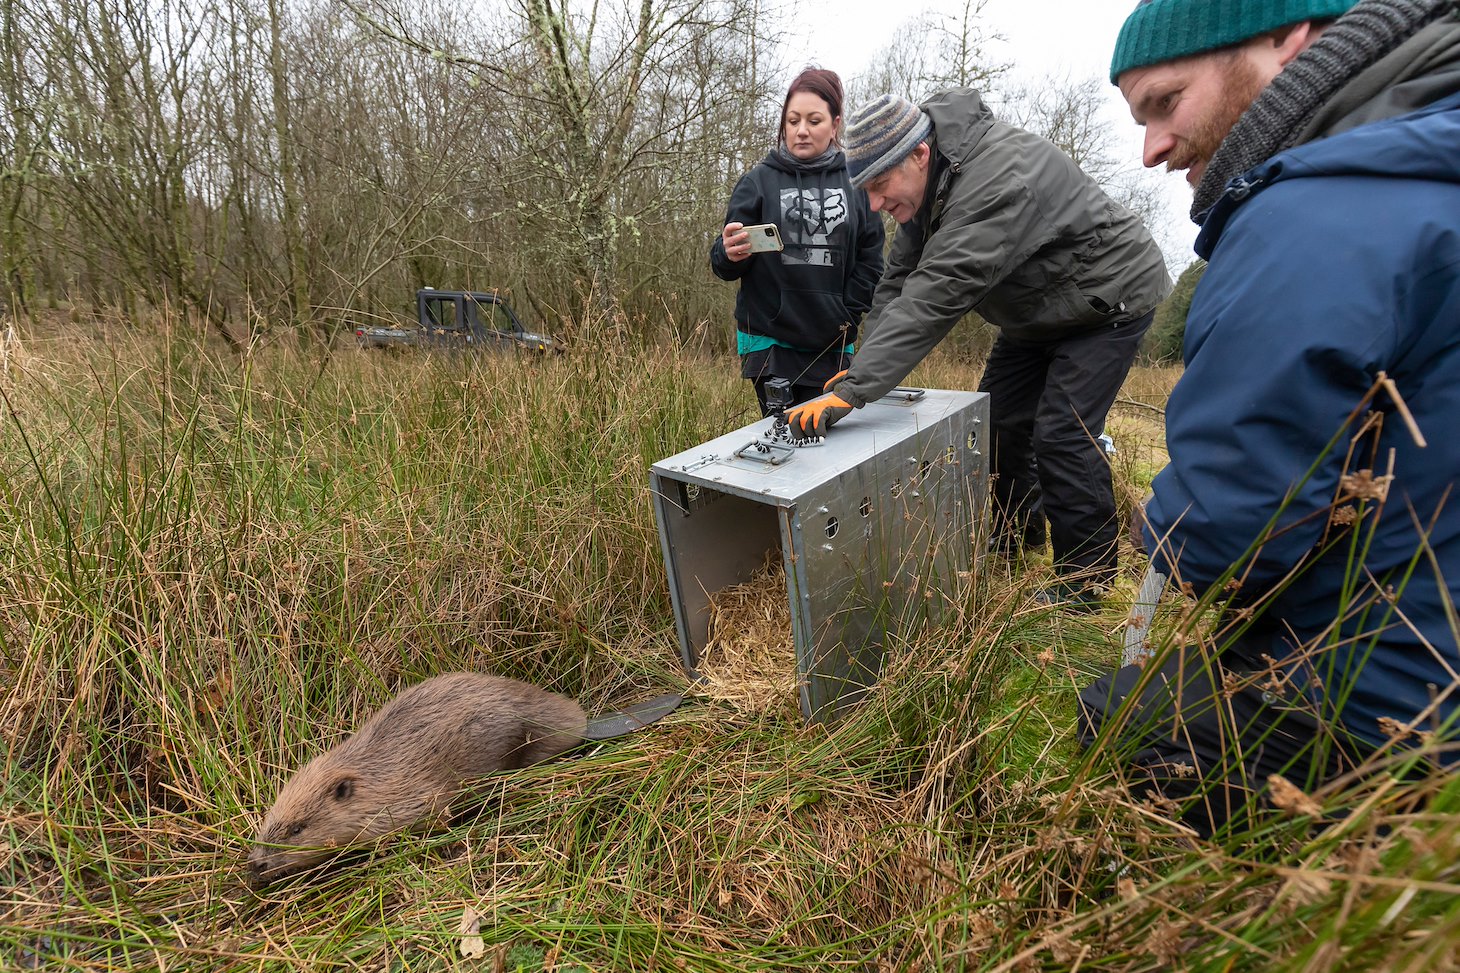 Tom Bowser (owner) releasing adult female beaver at Argaty Red Kite Centre, the first translocation within Scotland, Lerrocks Farm, Doune, Scotland, 29th Nov 2021